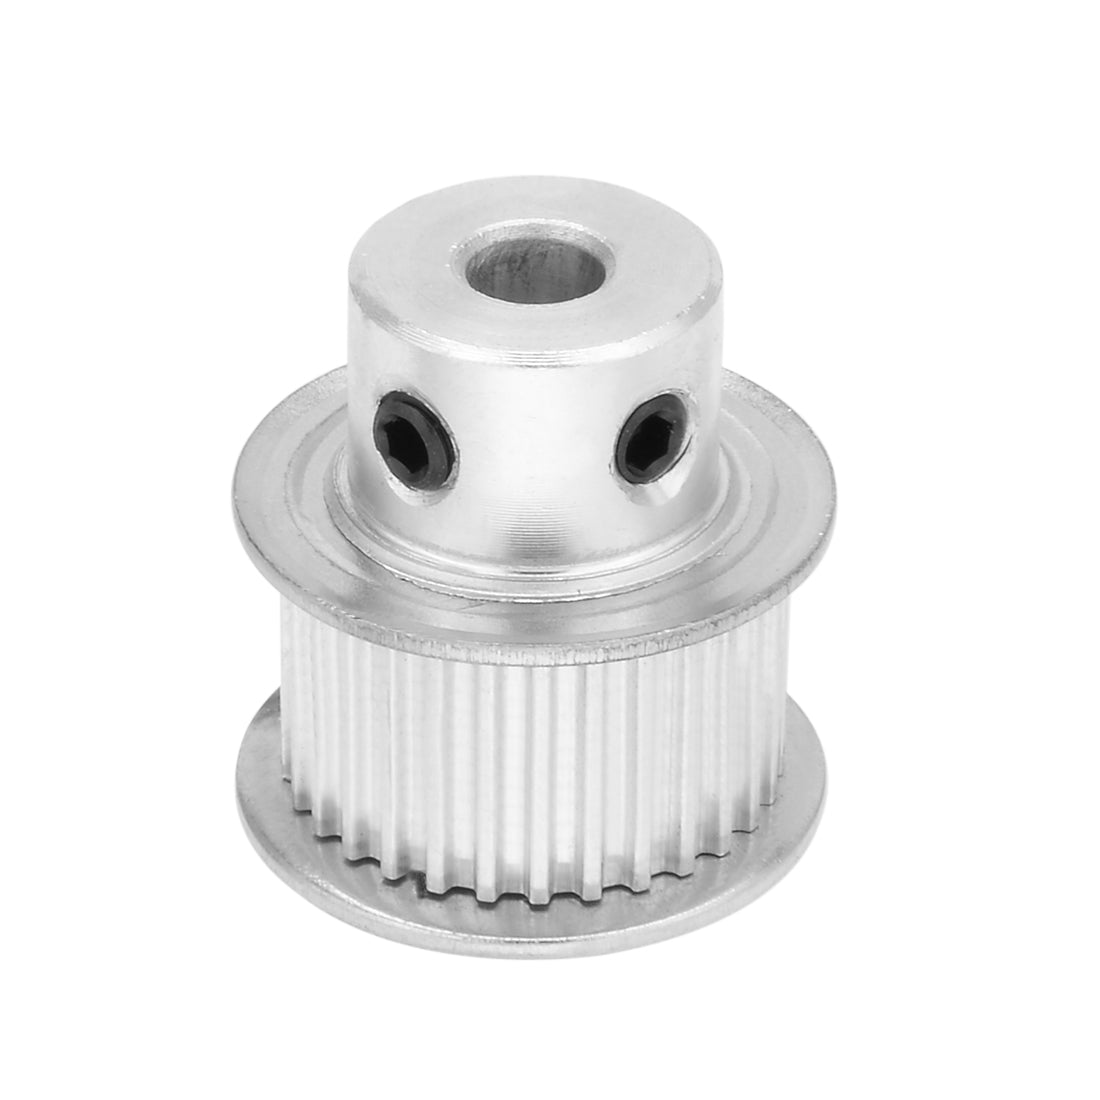 uxcell Uxcell Aluminum  30 Teeth 5mm Bore Timing Belt Idler Pulley Synchronous Wheel 10mm Belt for 3D Printer CNC